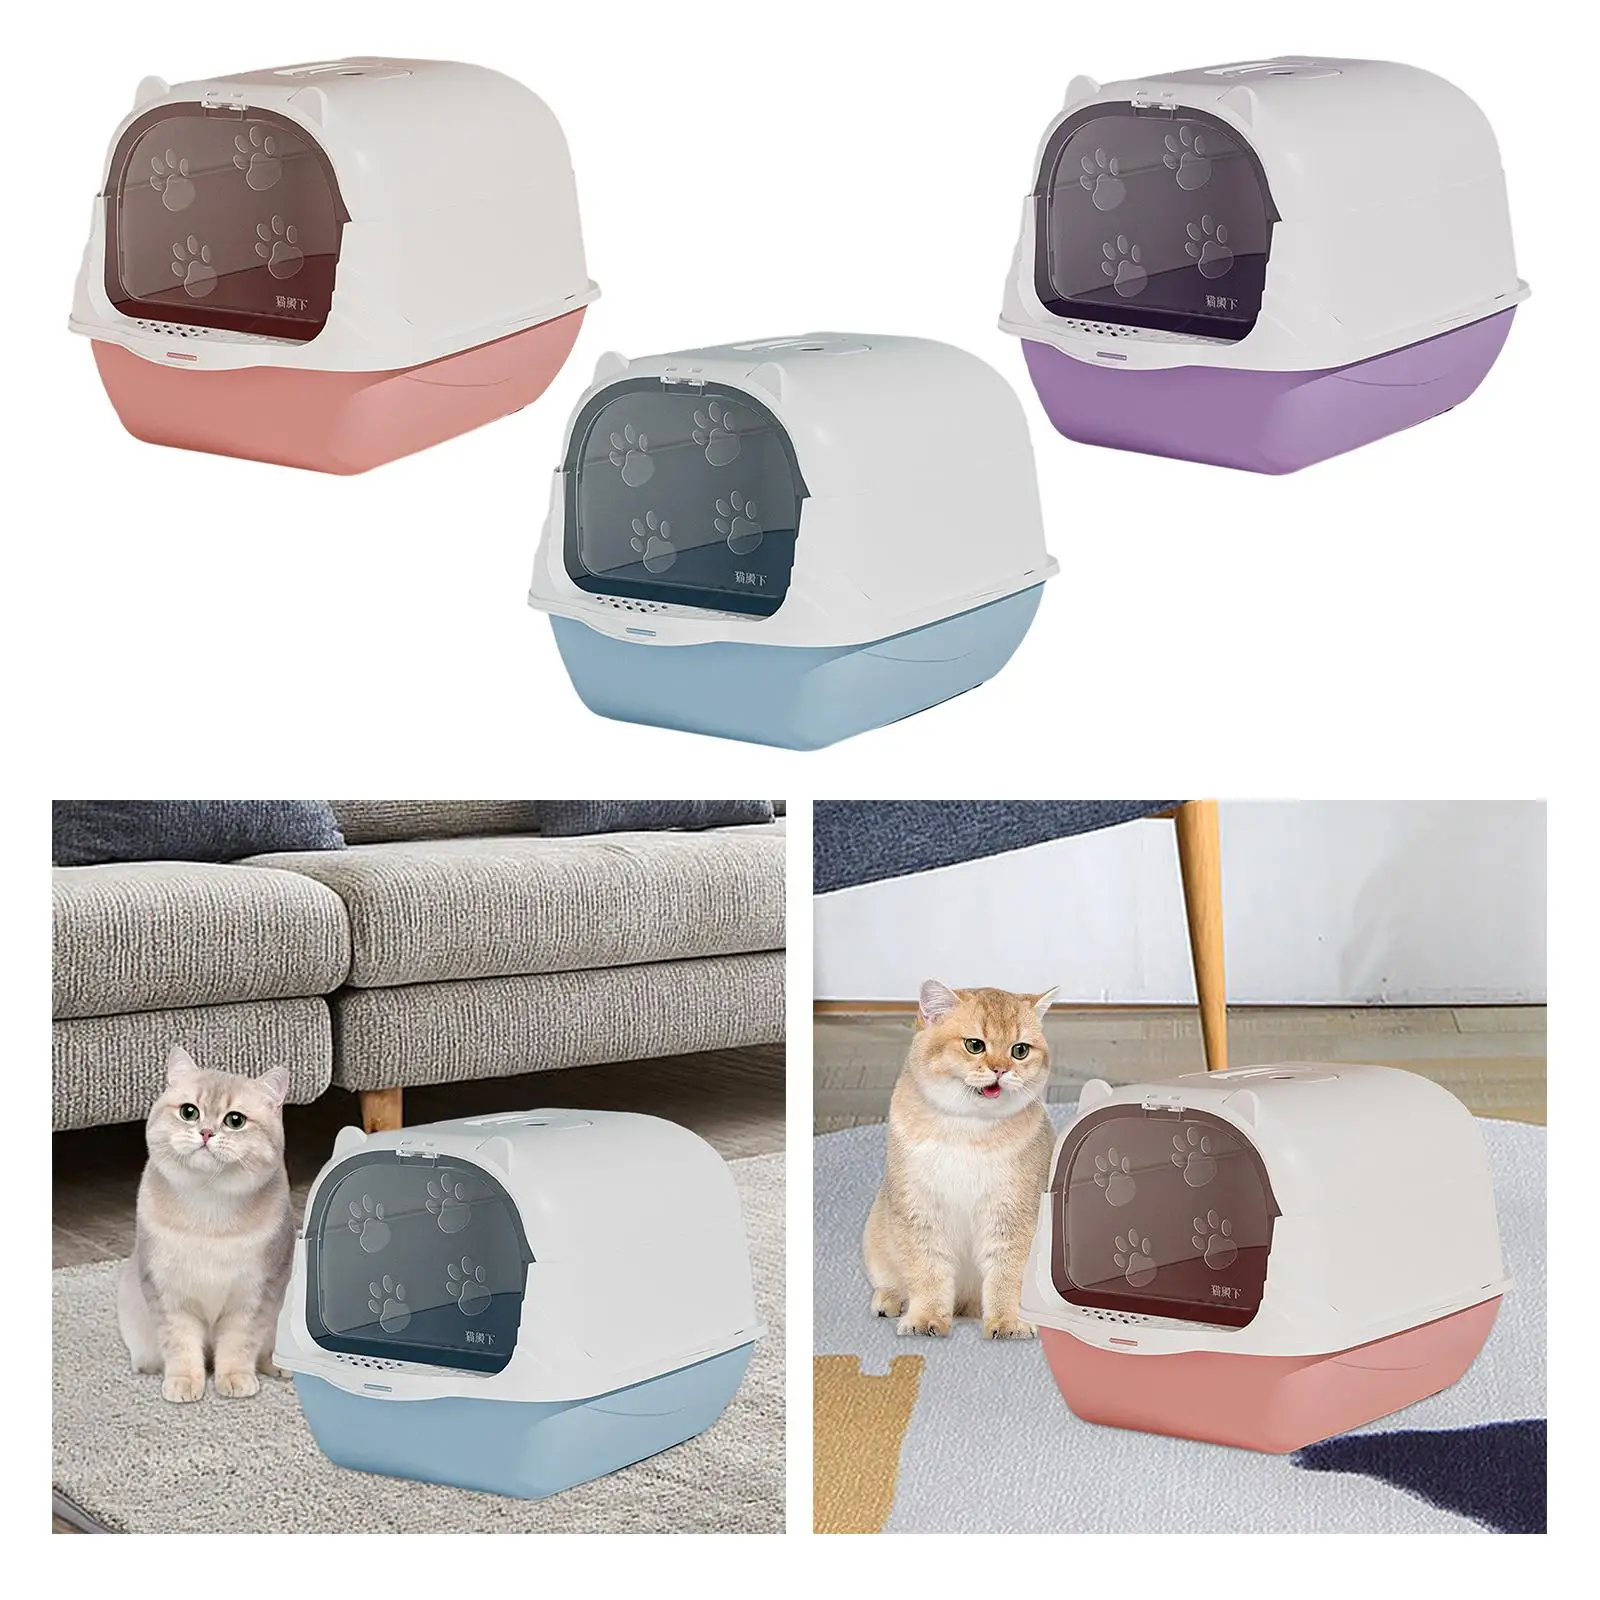 Hooded Cat Litter Box with Lid Large Cat Toilet Durable Large Cat Litter Box